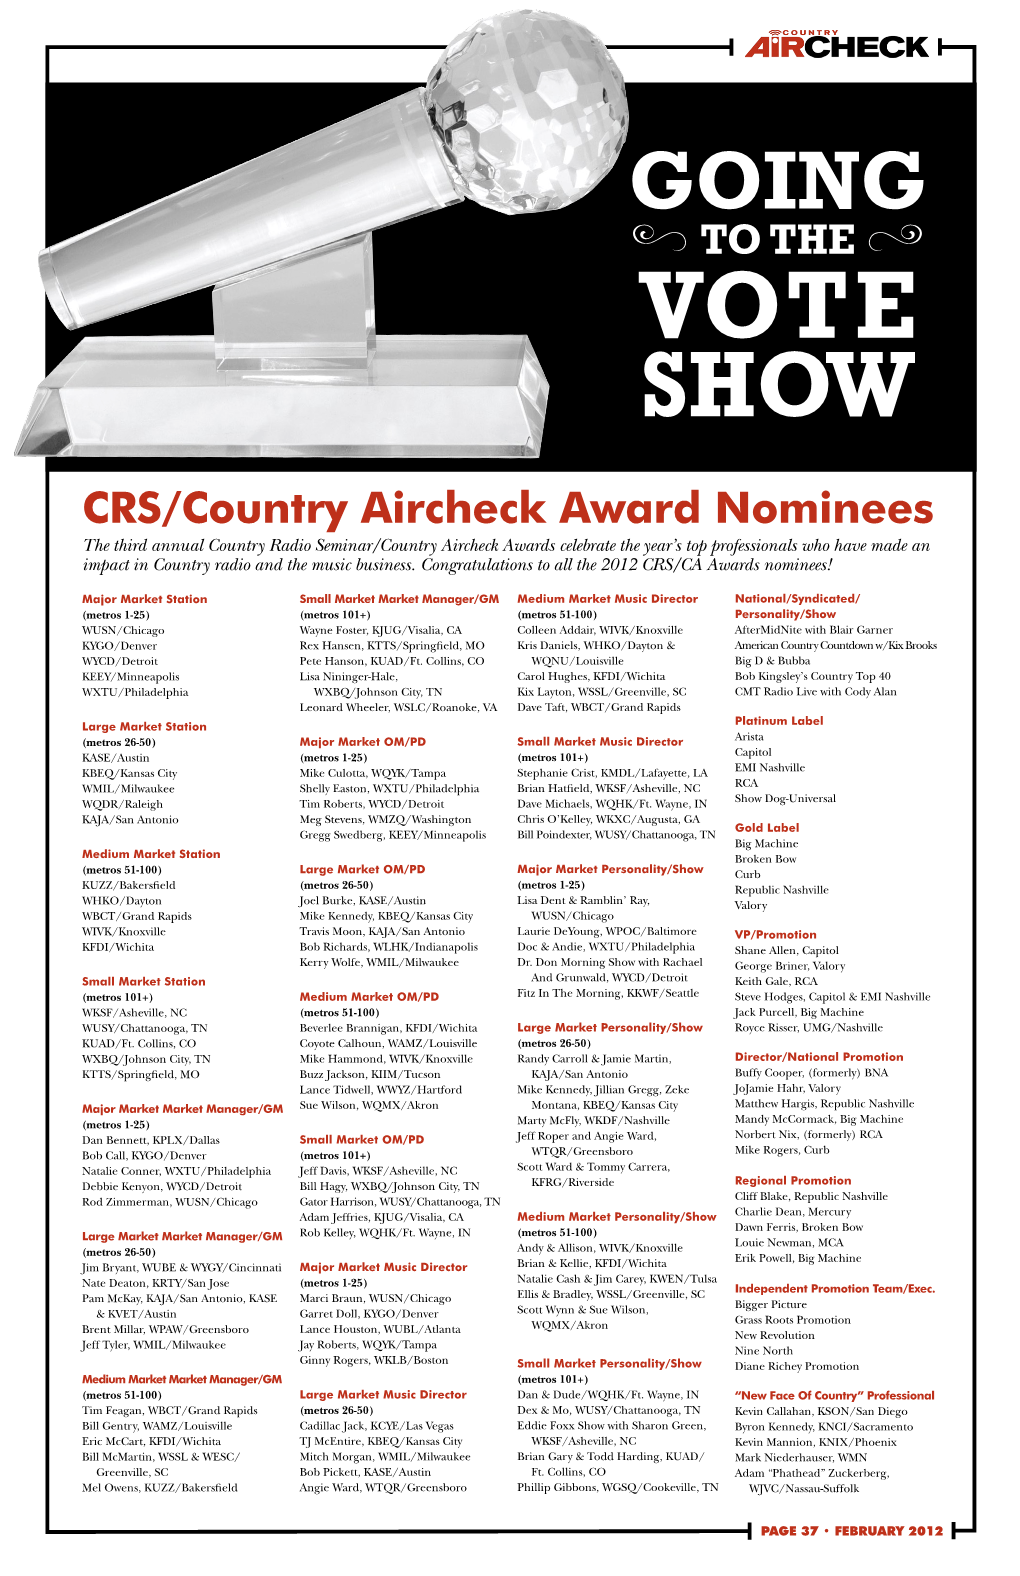 TO the CRS/Country Aircheck Award Nominees